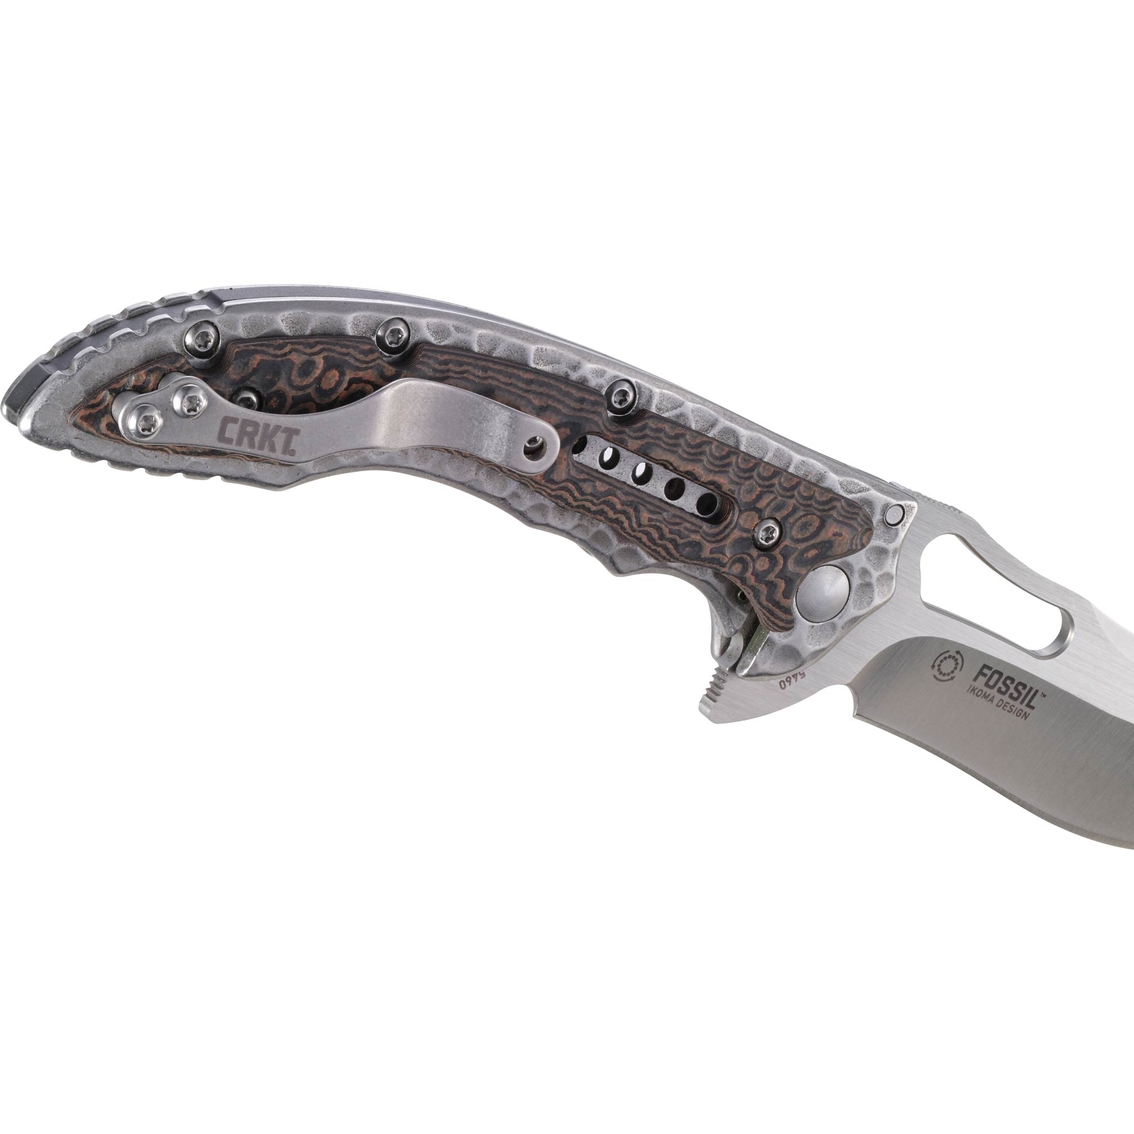 Columbia River Knife and Tool Fossil Compact Clip Folder Knife - Image 3 of 4